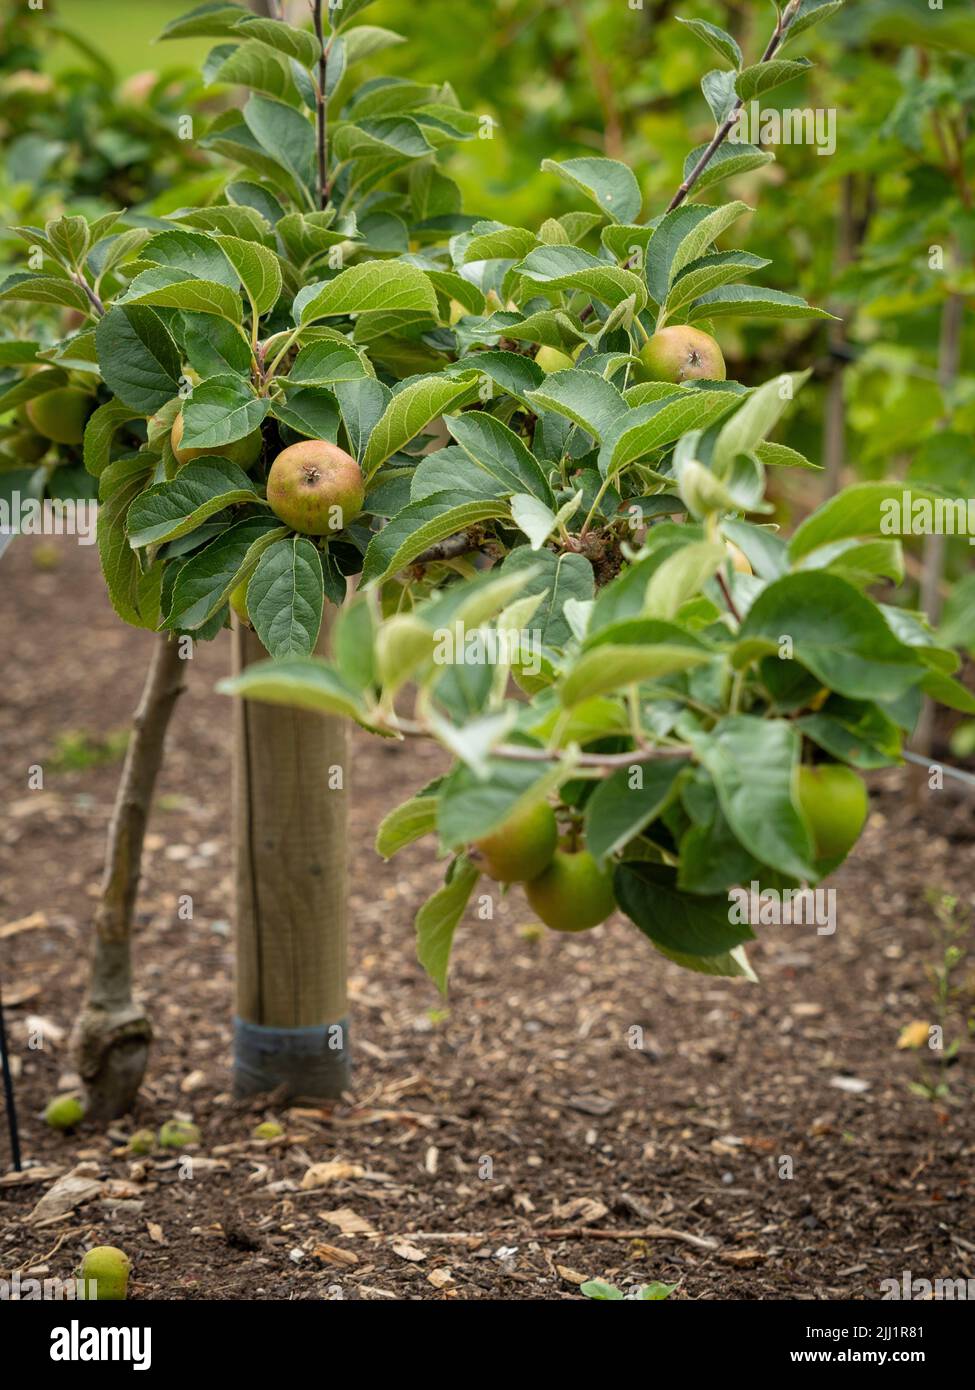 Horizontal cordon trained apple trees, commonly called stepover apples, growing in a UK garden Stock Photo